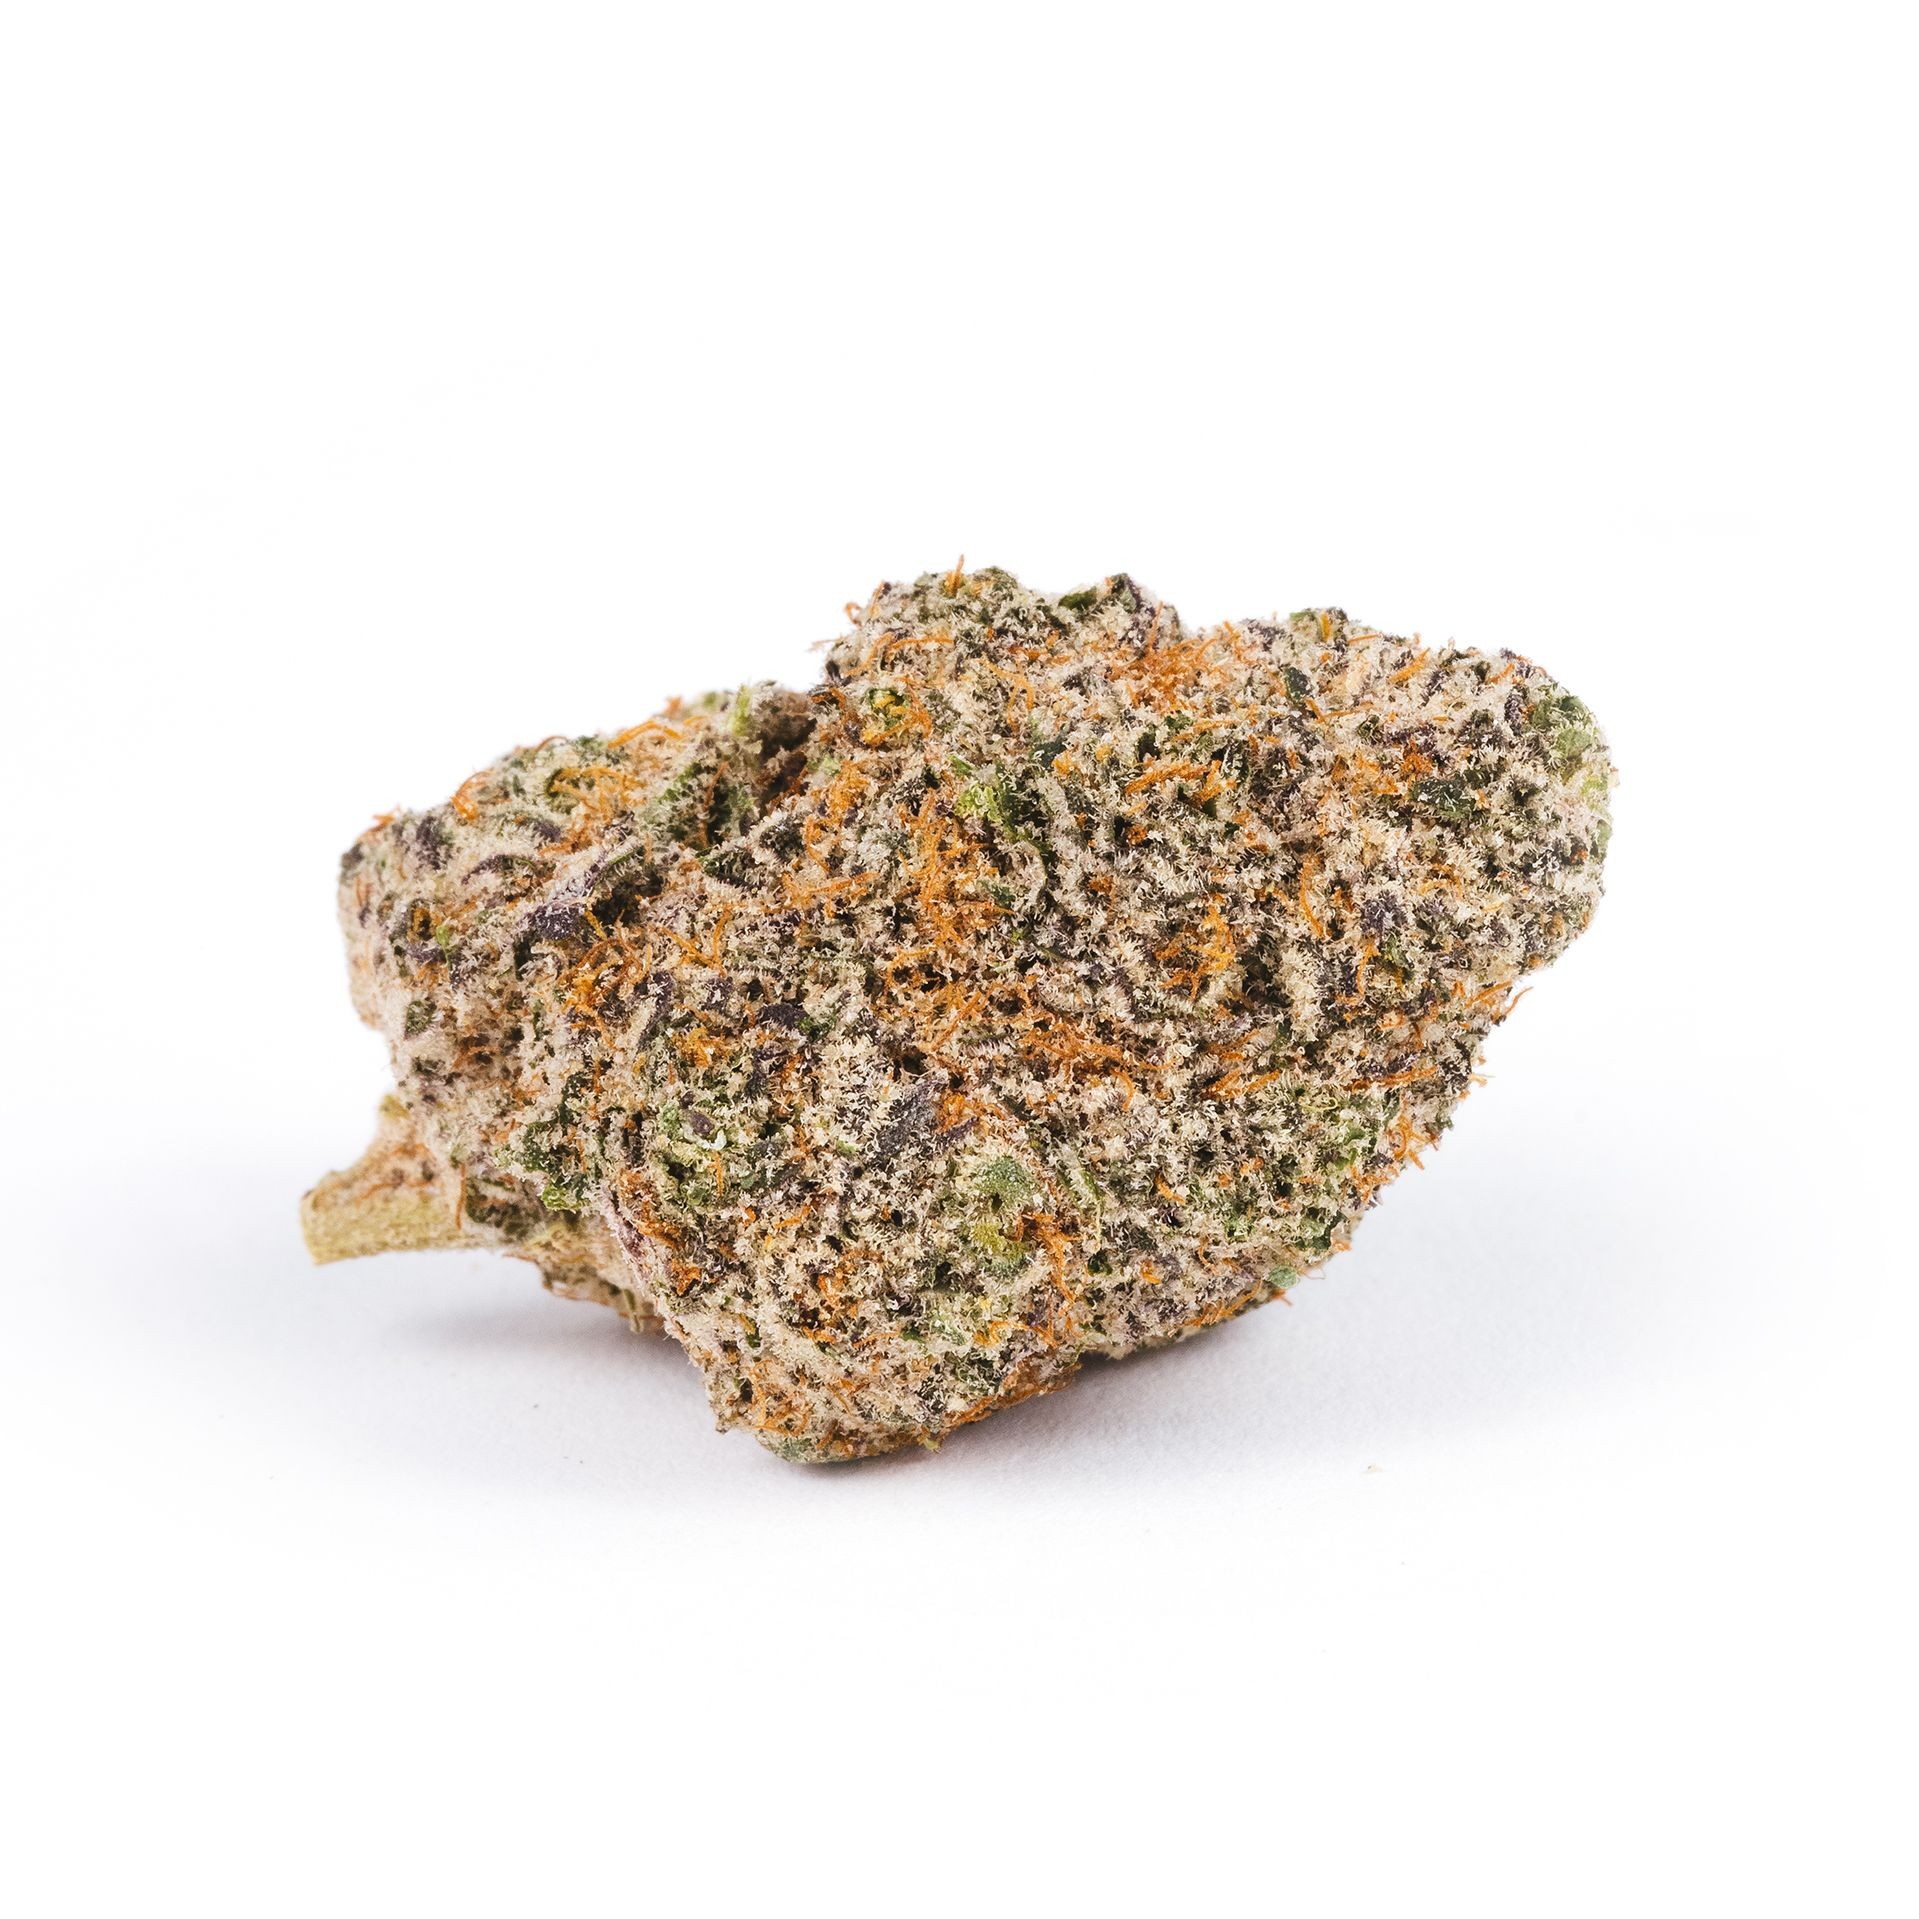 Do-Si-Dos Strain | Buy Weed Online | Green Society